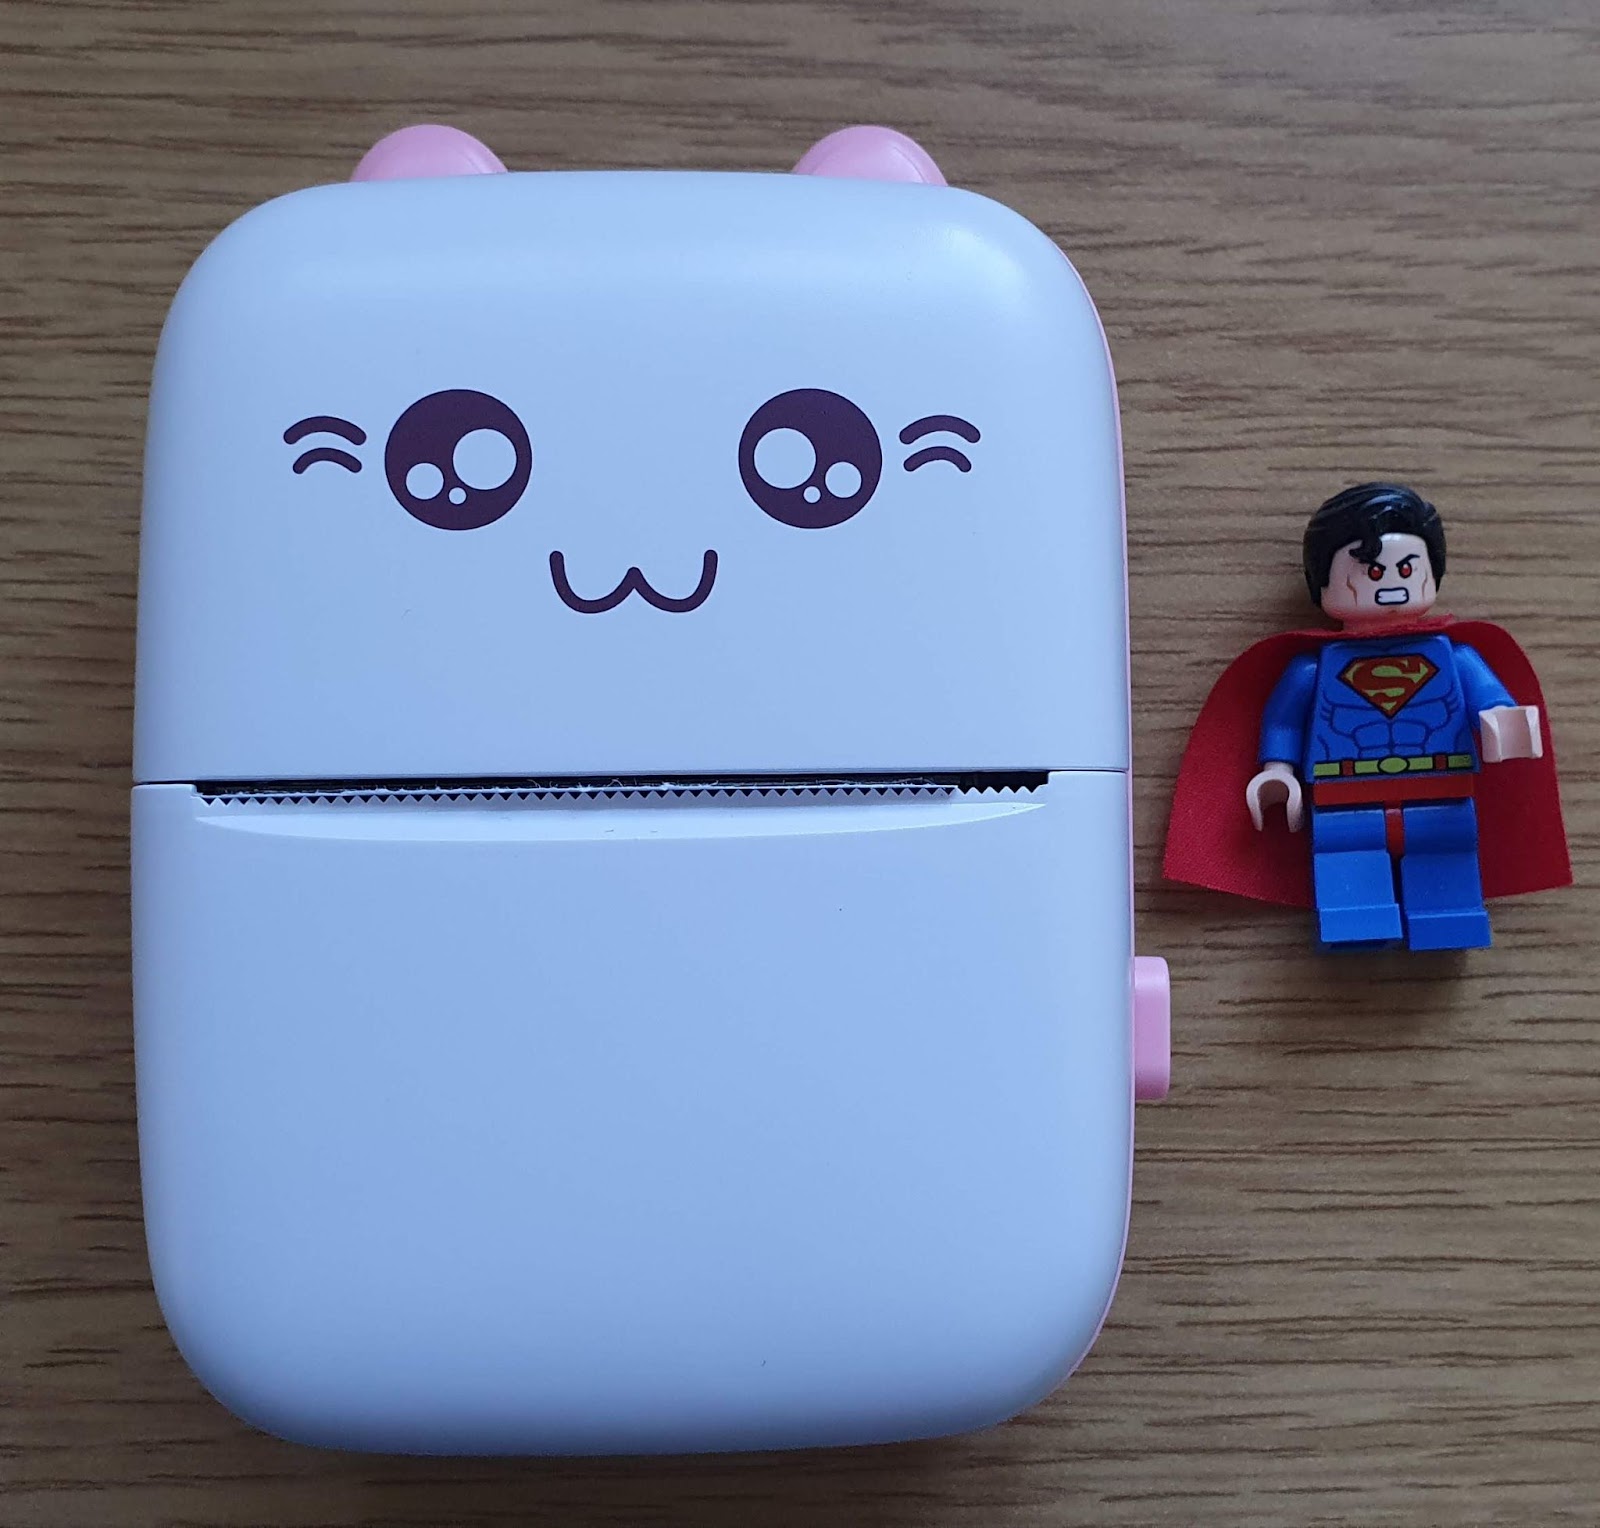 Thermal printer with a stylised cat face next to a Lego superman minifig for size comparison